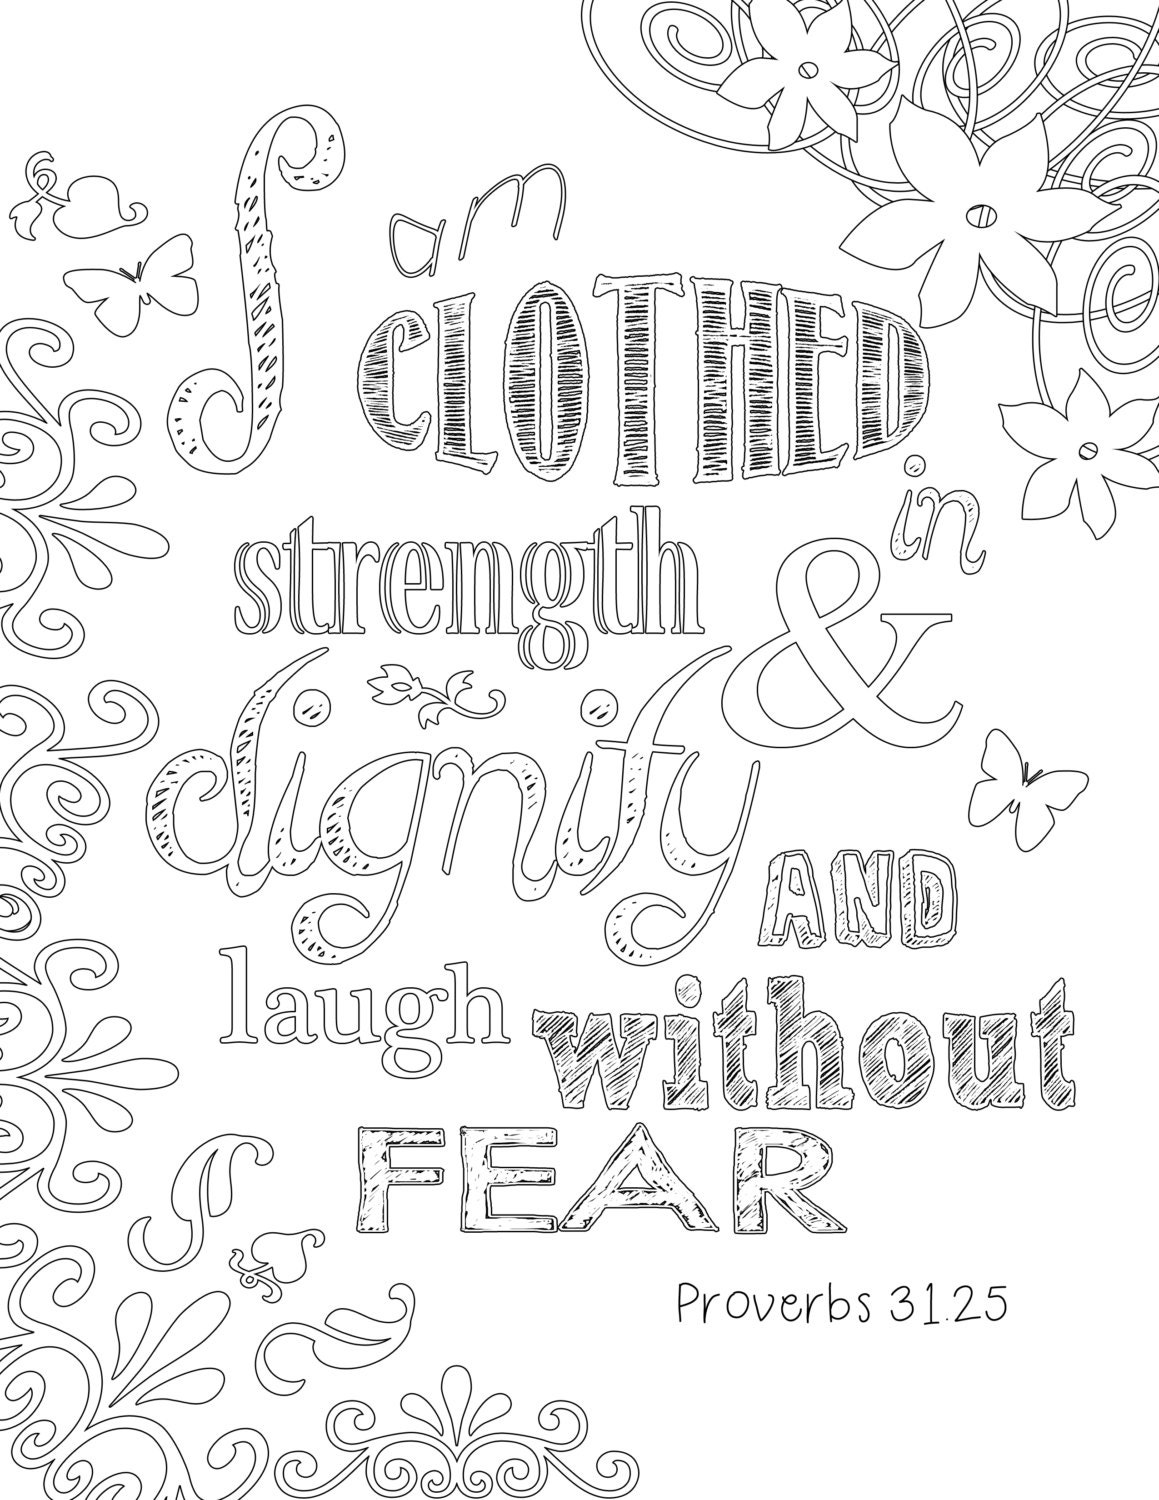 Proverbs coloring page